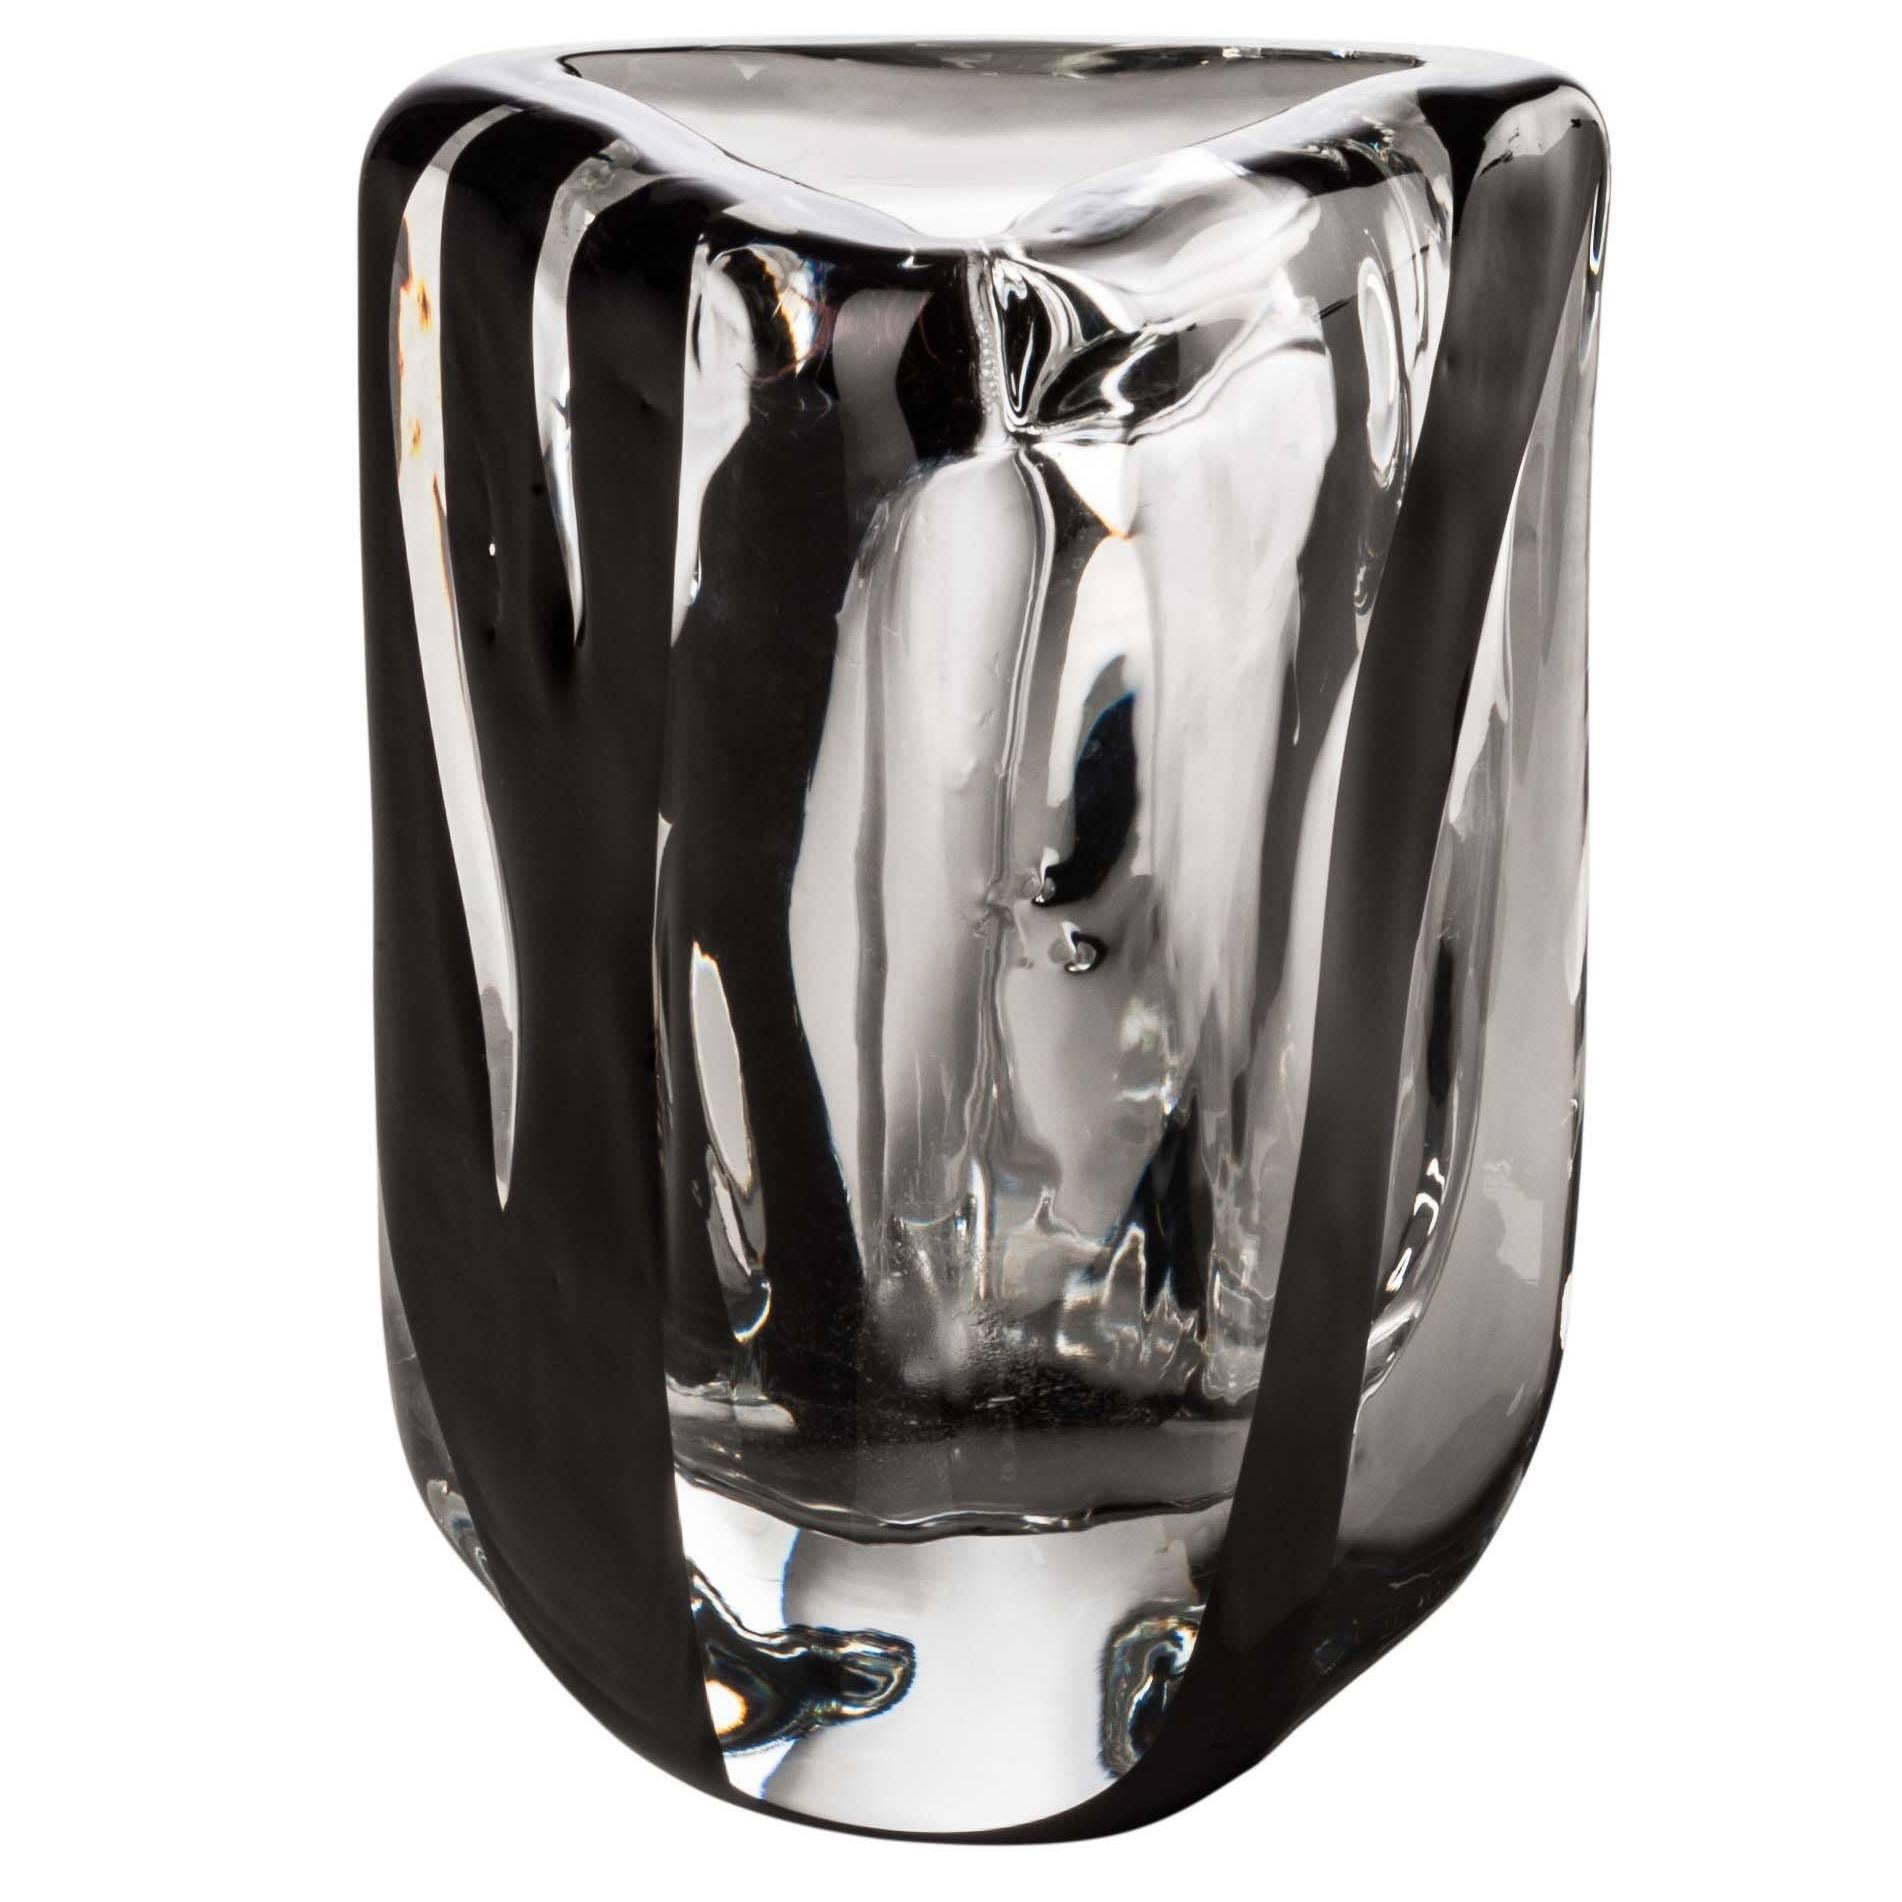 Extra-Small Triangolo Vase in Clear and Black by Peter Marino & Venini